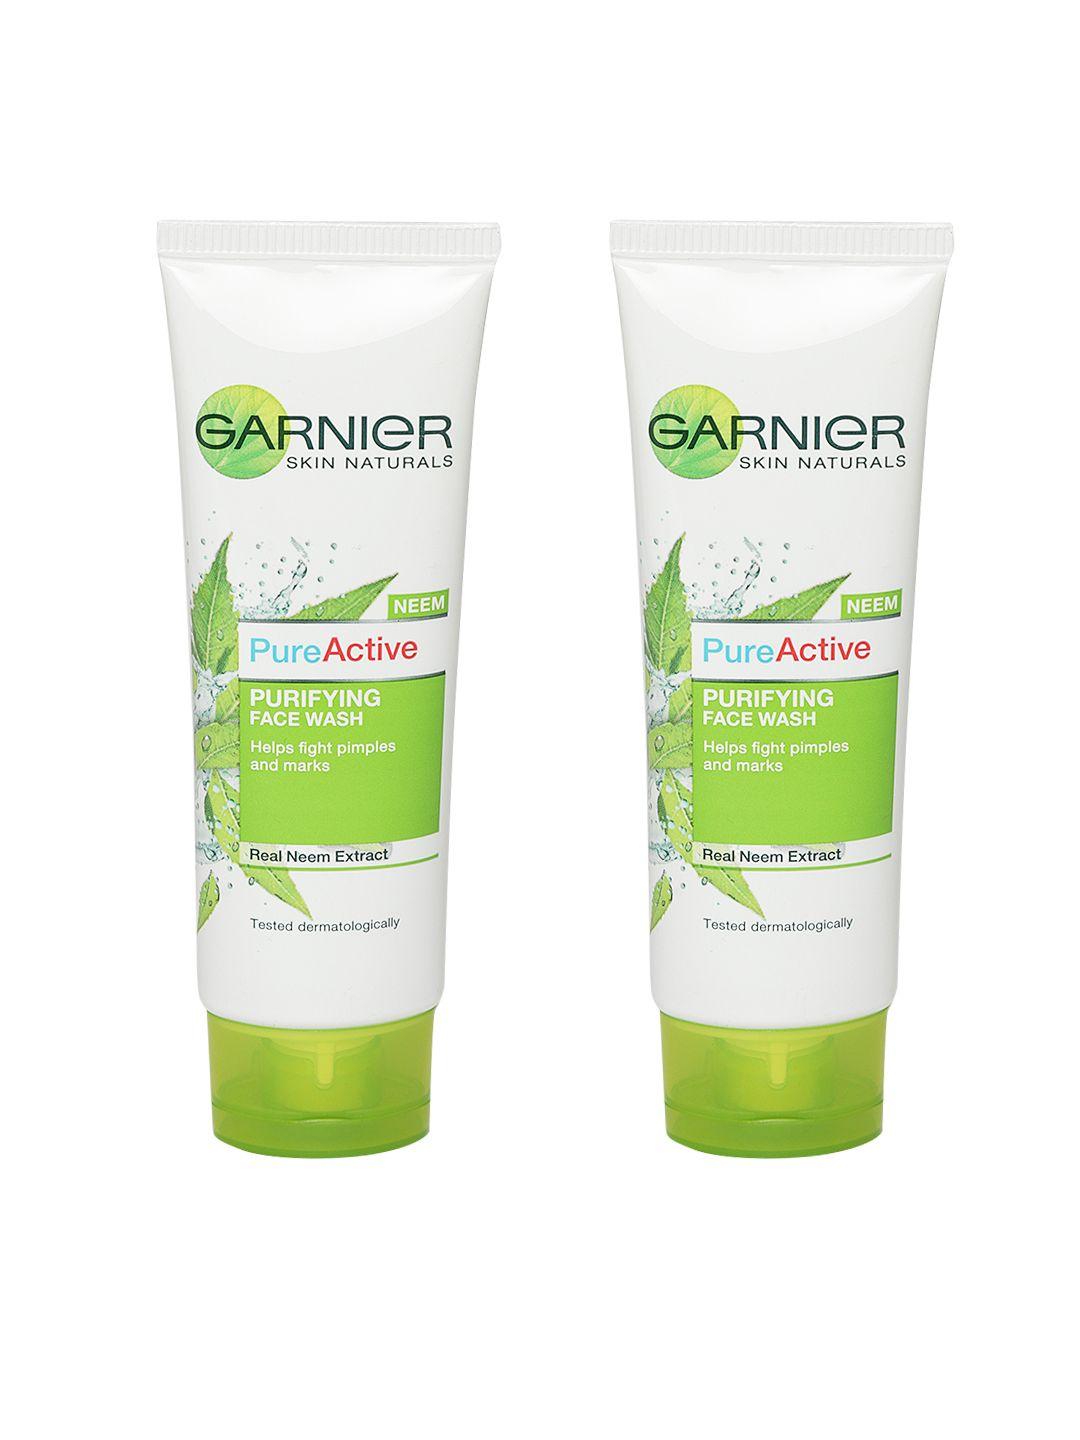 garnier set of 2 skin naturals pure active real neem extract purifying face washes